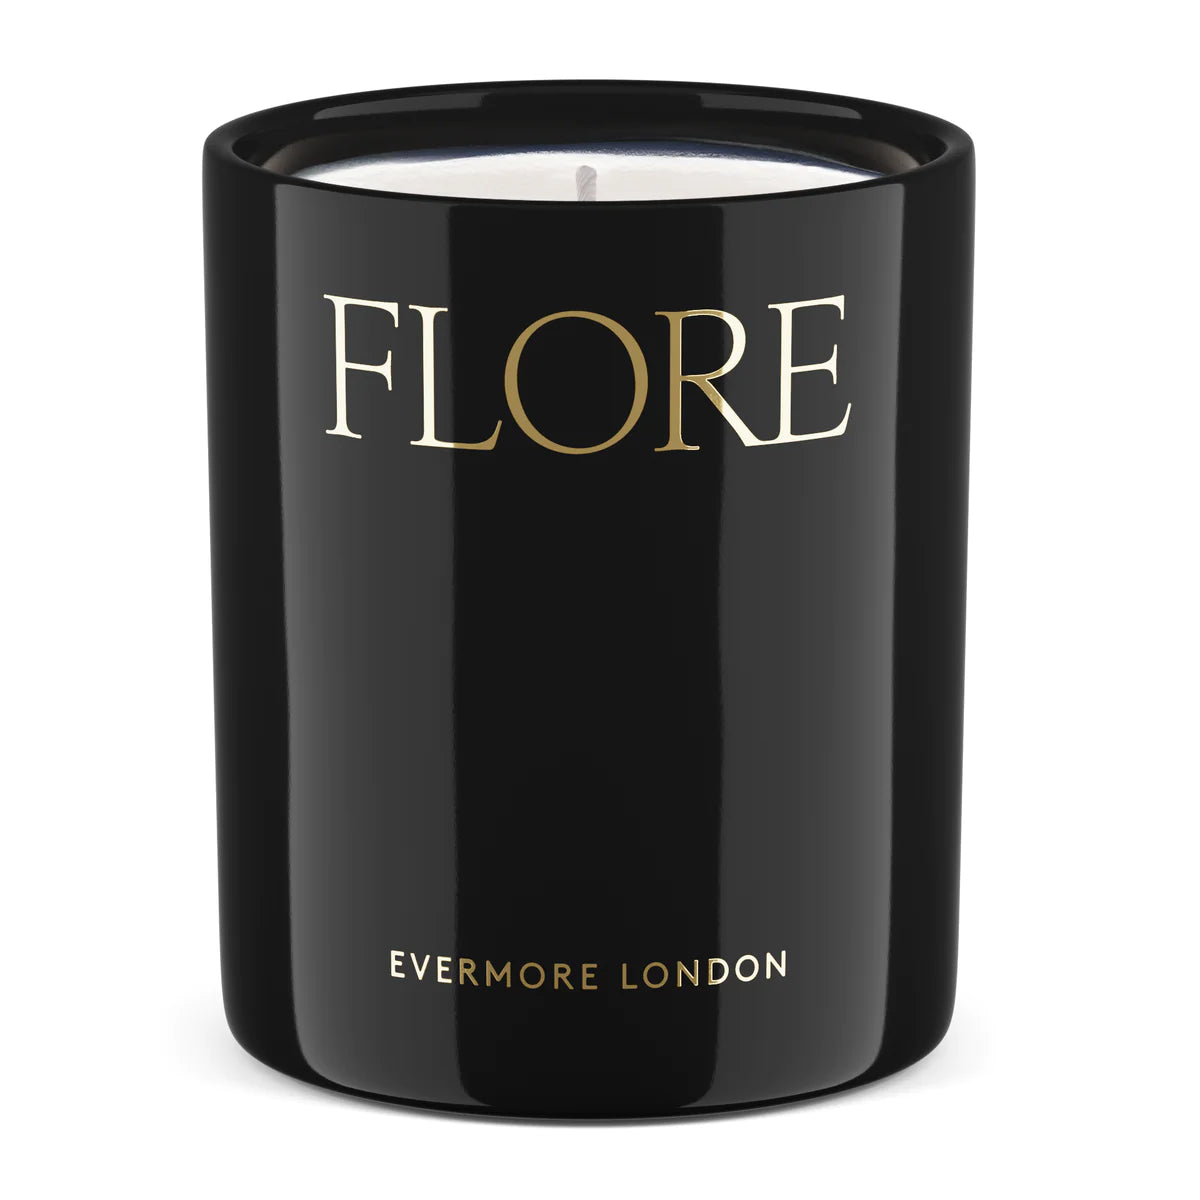 Evermore Flore Candle 300g Mist & Lilac Blossom